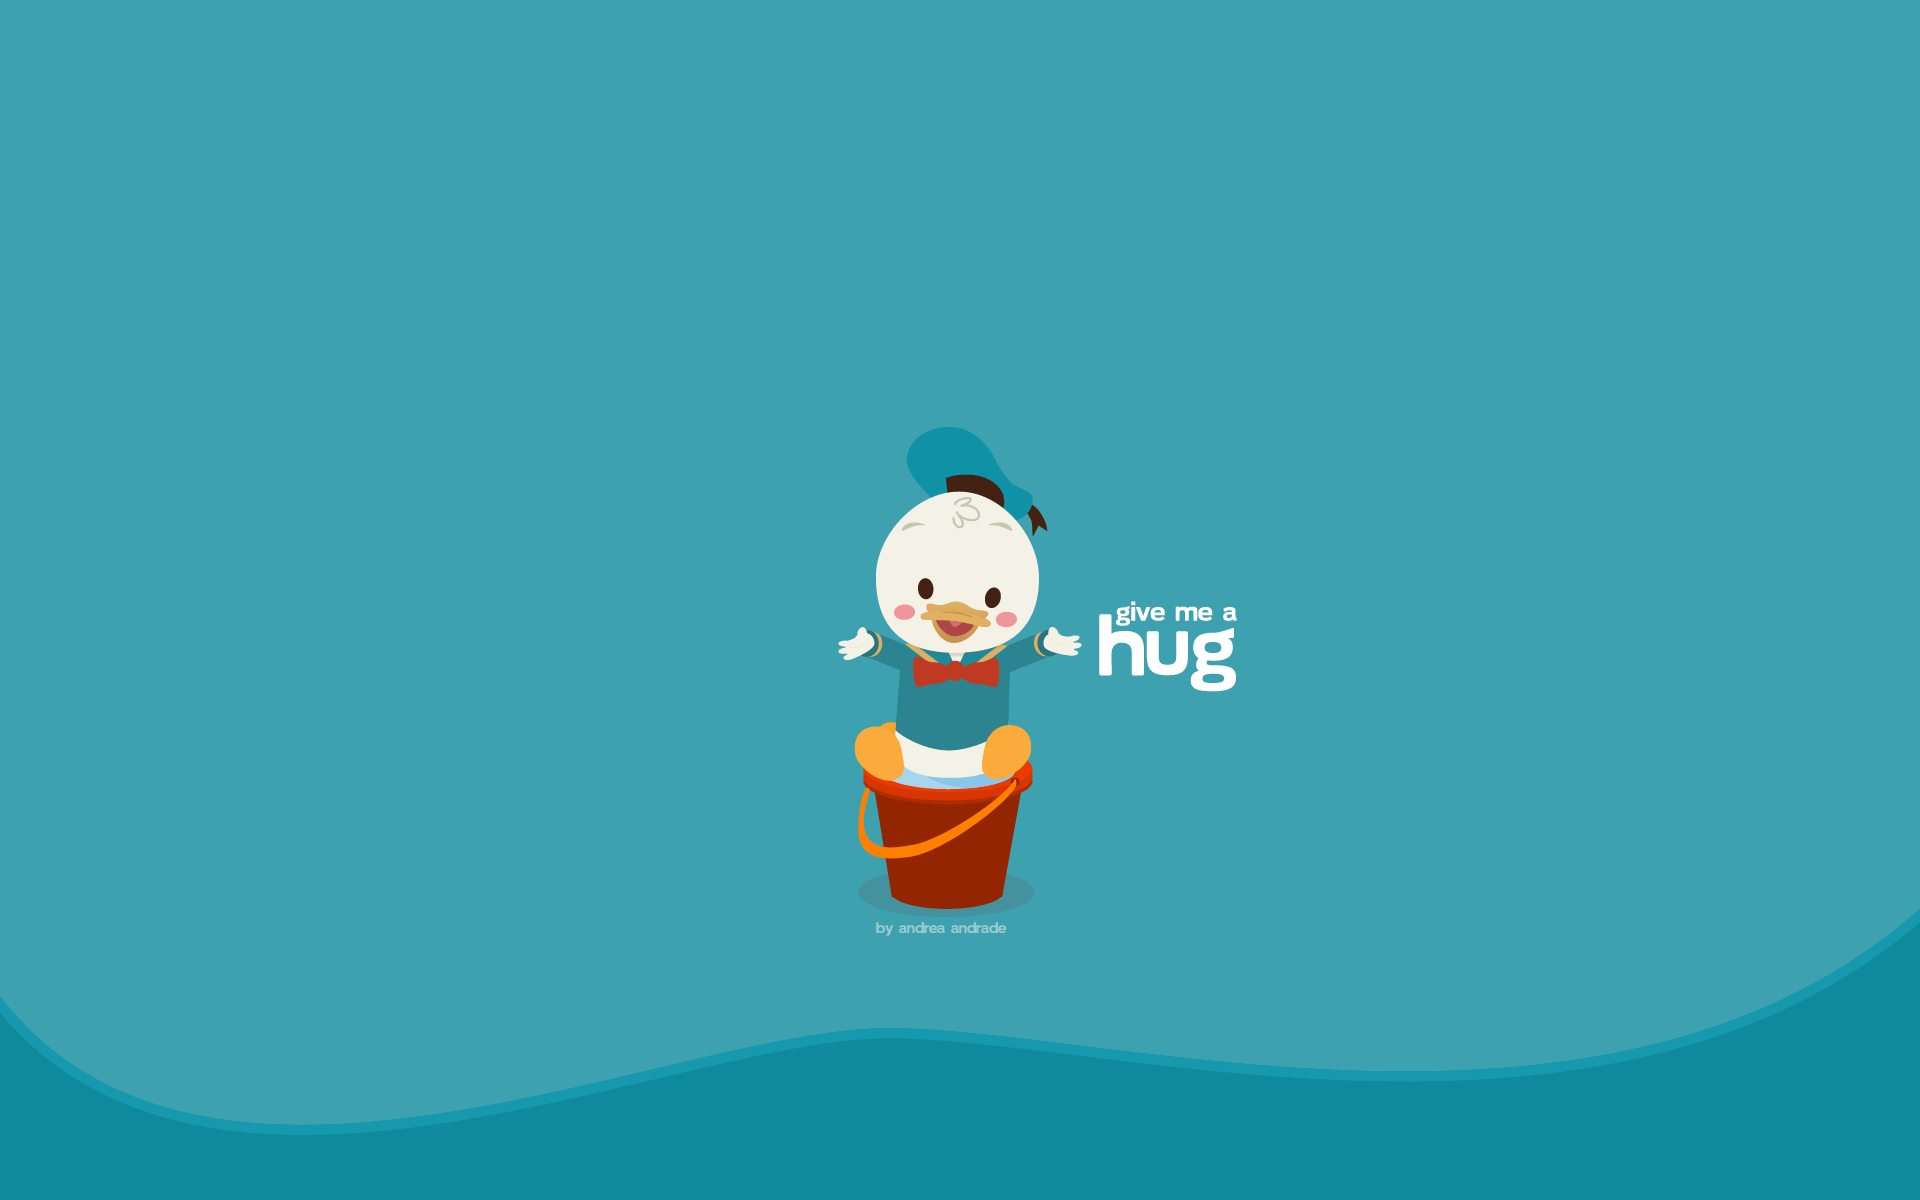 A cute wallpaper of a duck asking for a hug - Duck